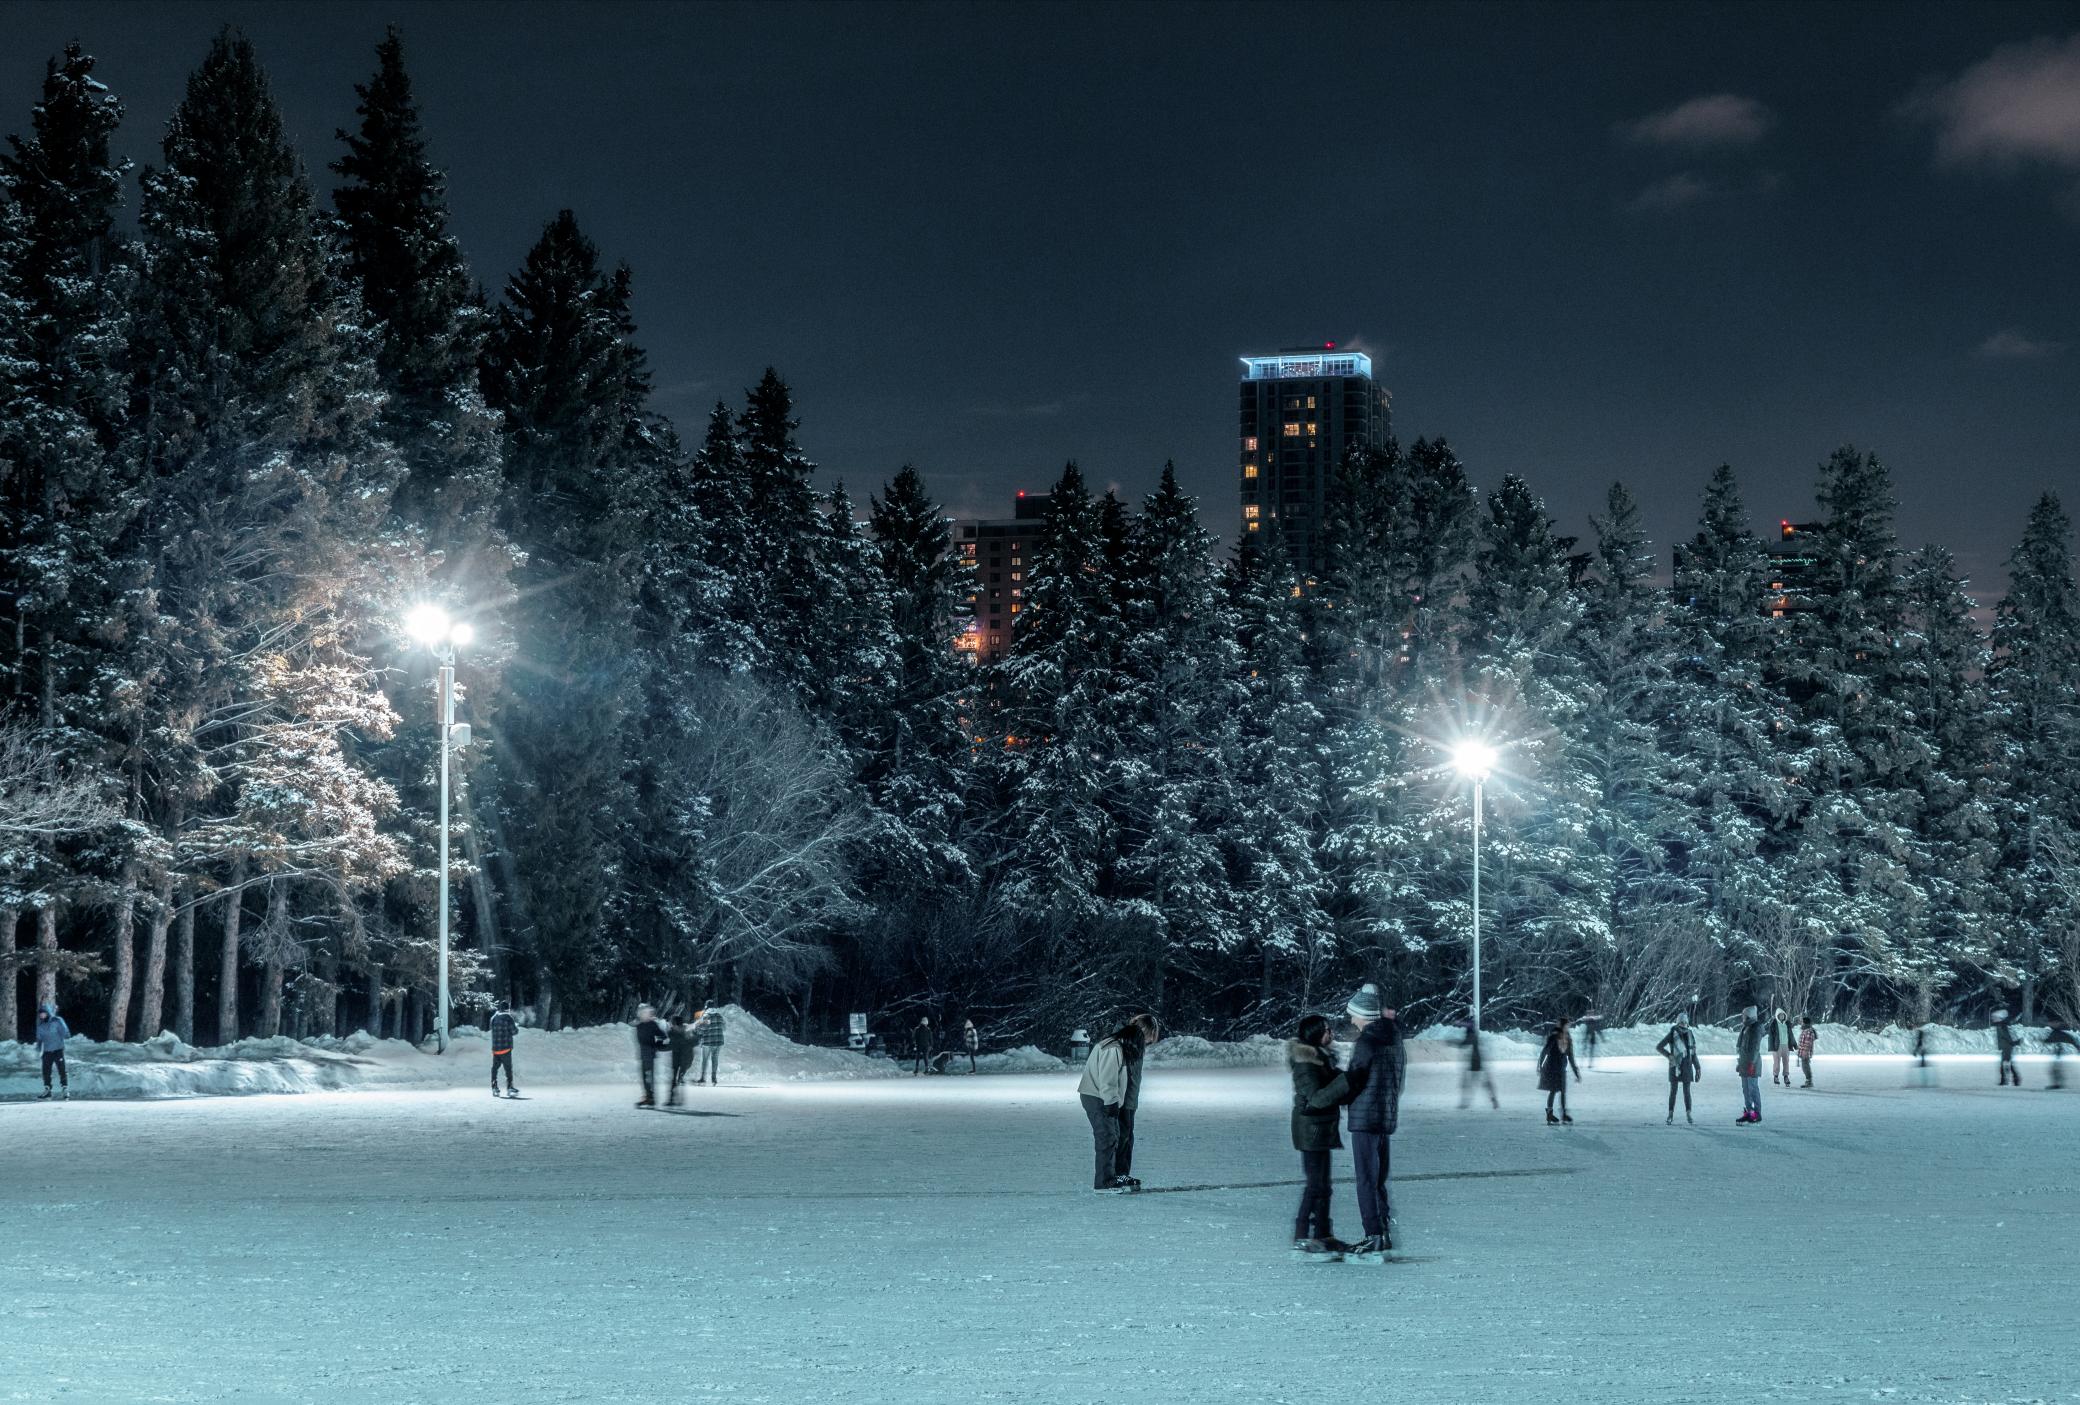 People skating at the victoria park oval at night in the winter.